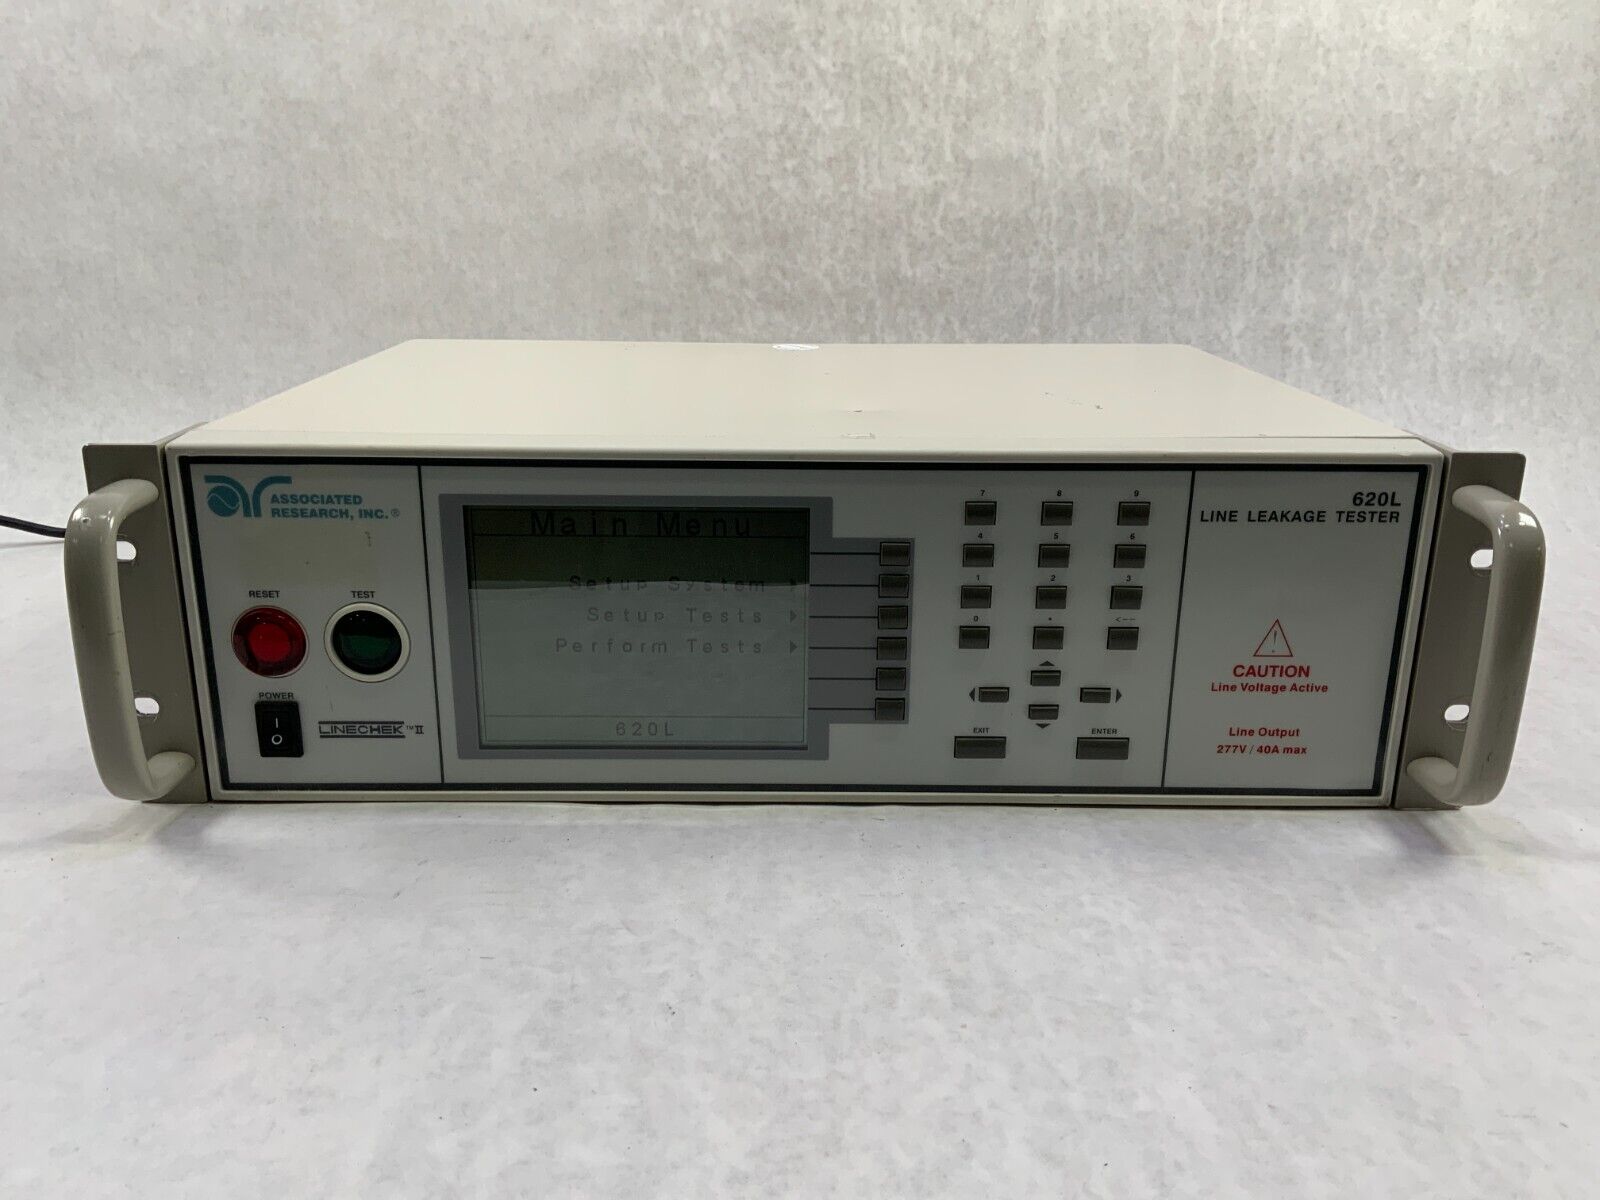 Associated Research Model 620L 3U Fully Automated Line Leakage Tester